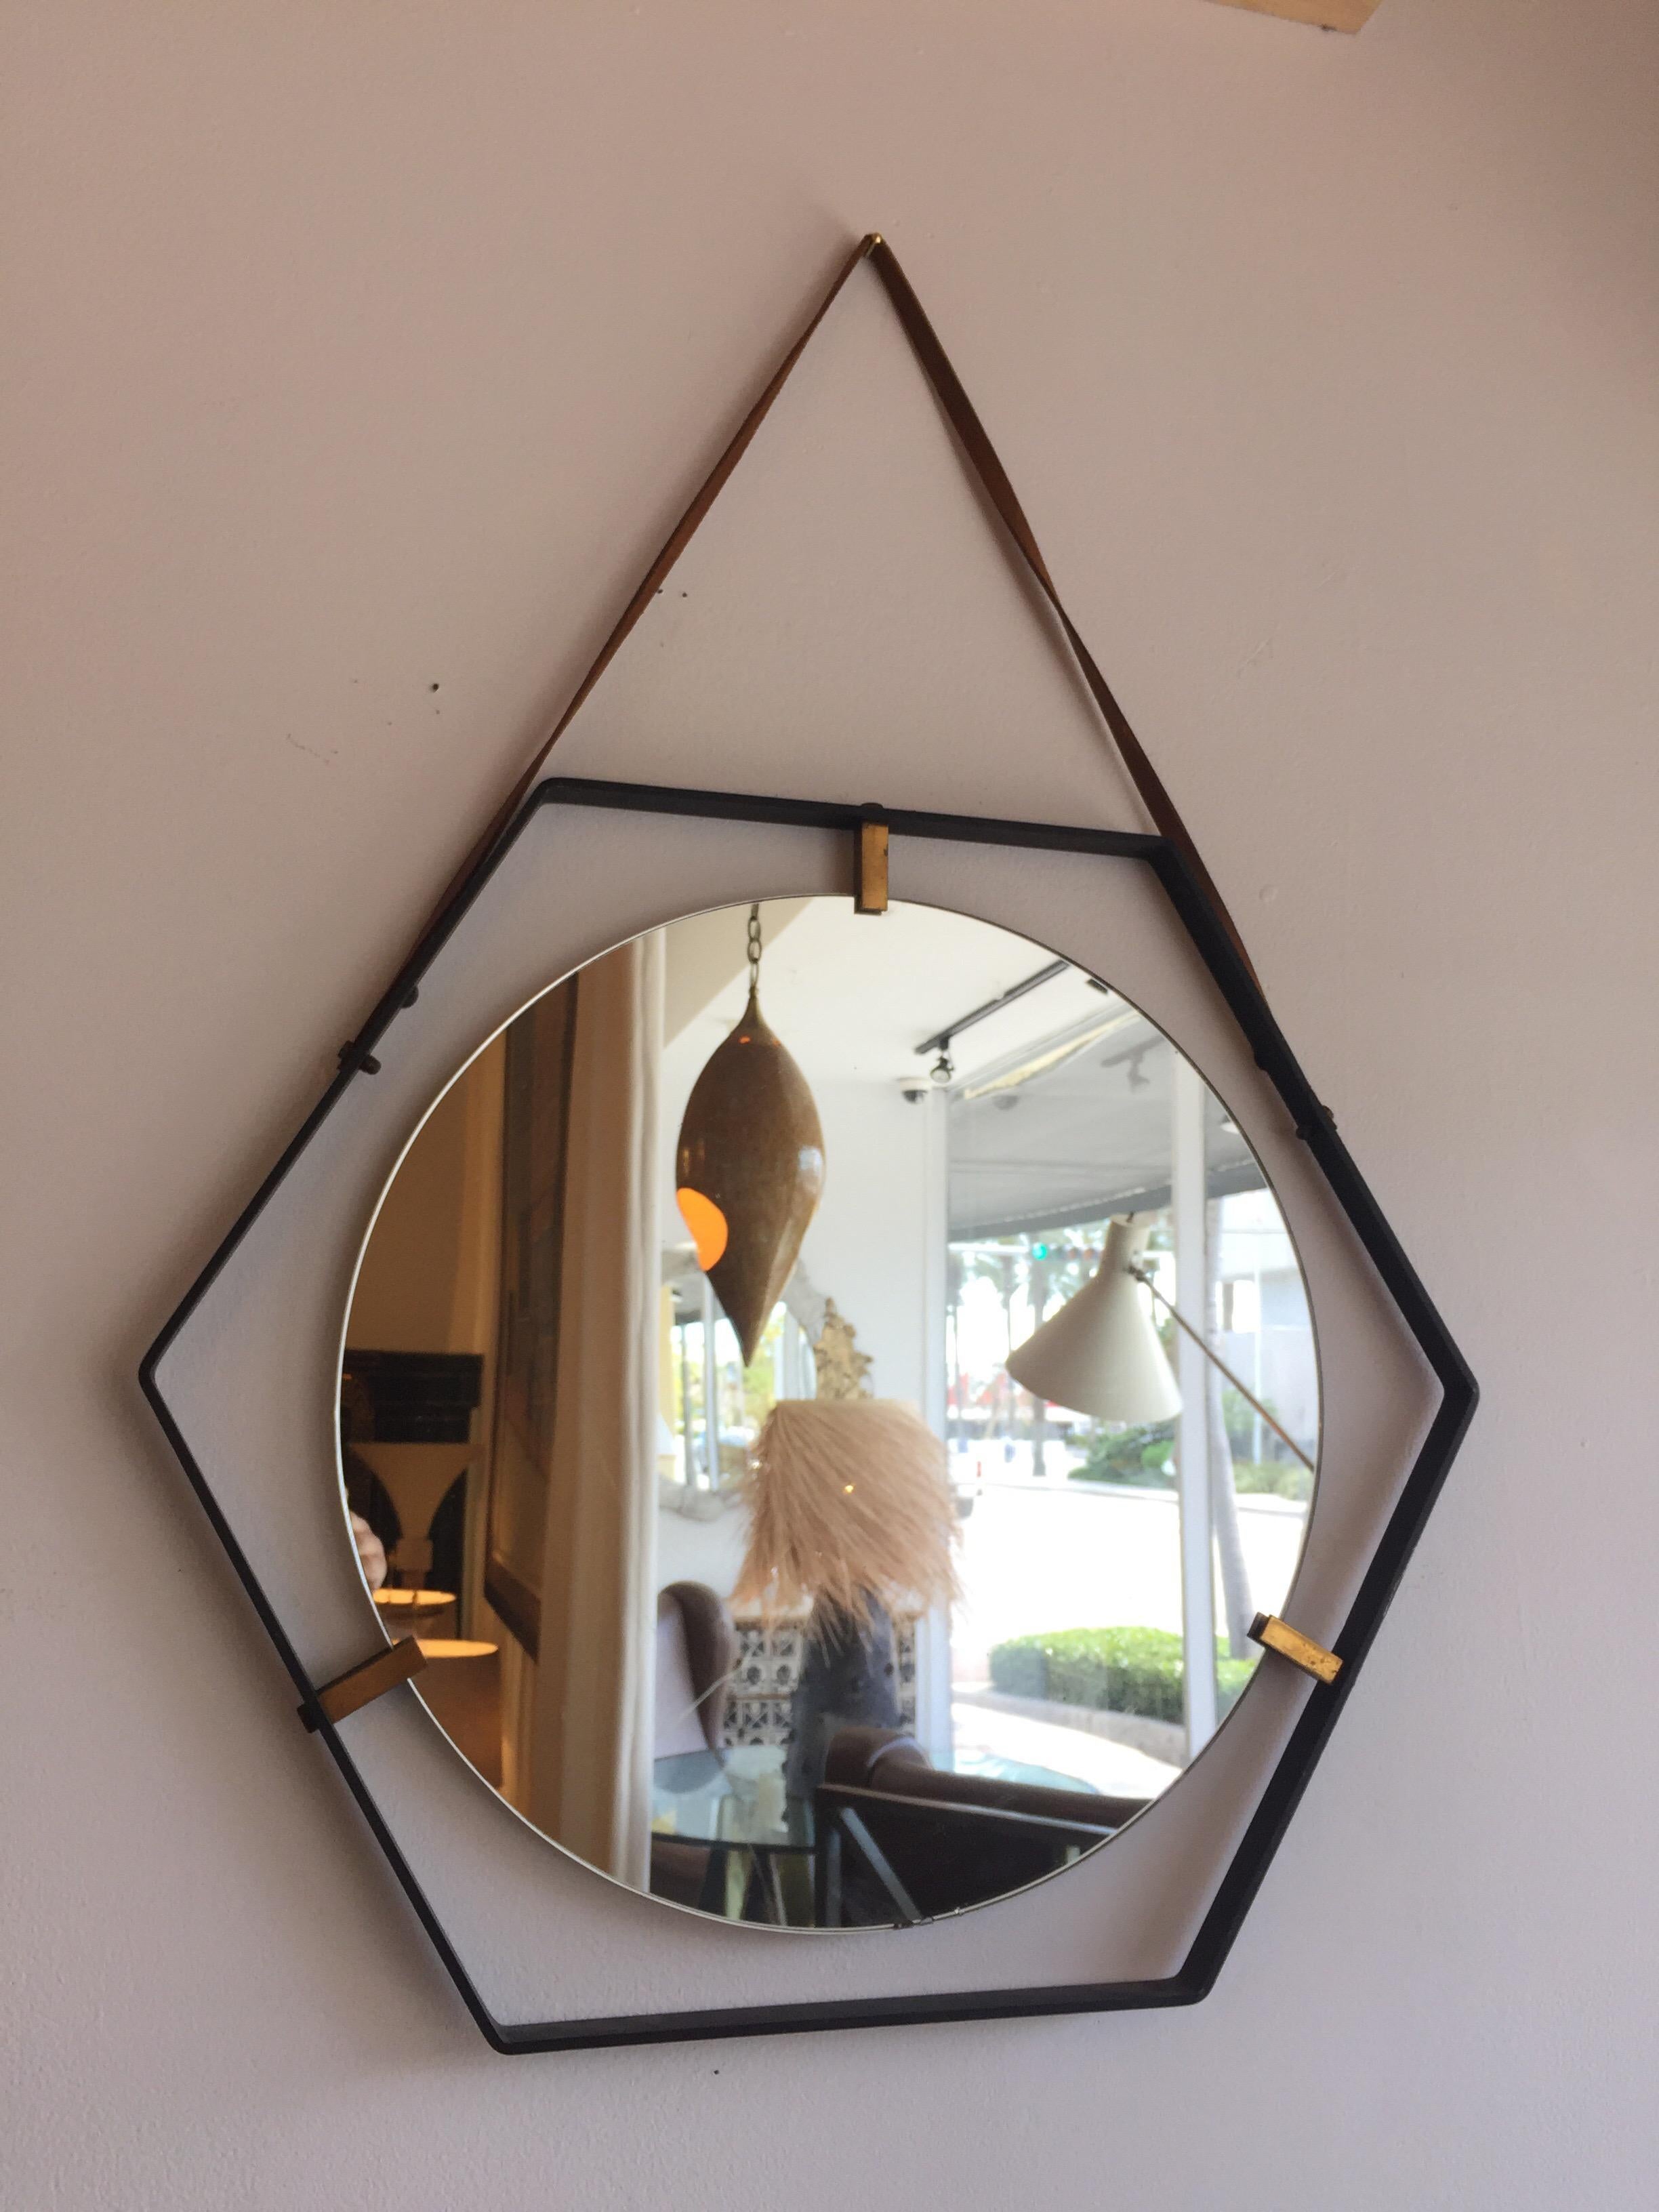 A wonderful round mirror floating in a flat metal hexagonal frame and hung by a leather strap. Designed by Santambrogio & De Berti in the 1950s with brass hardware.